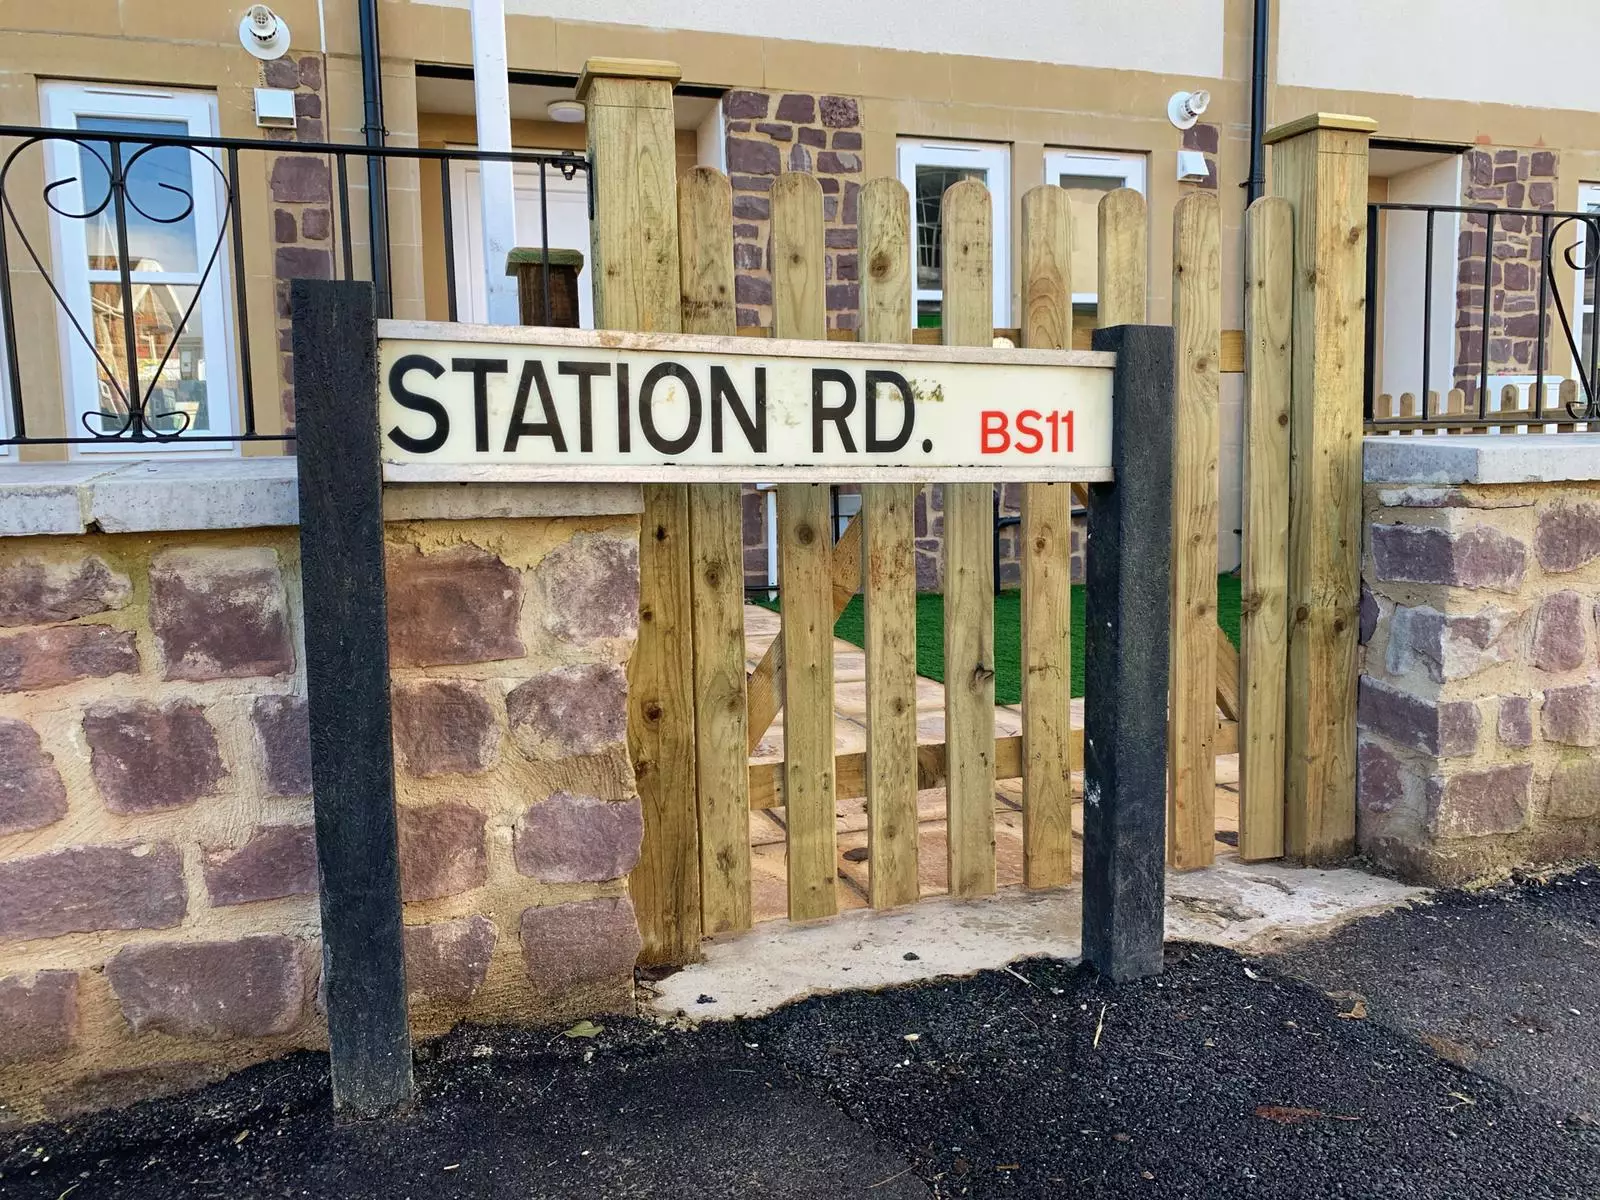 The Station Road sign blocks the gate of entry (